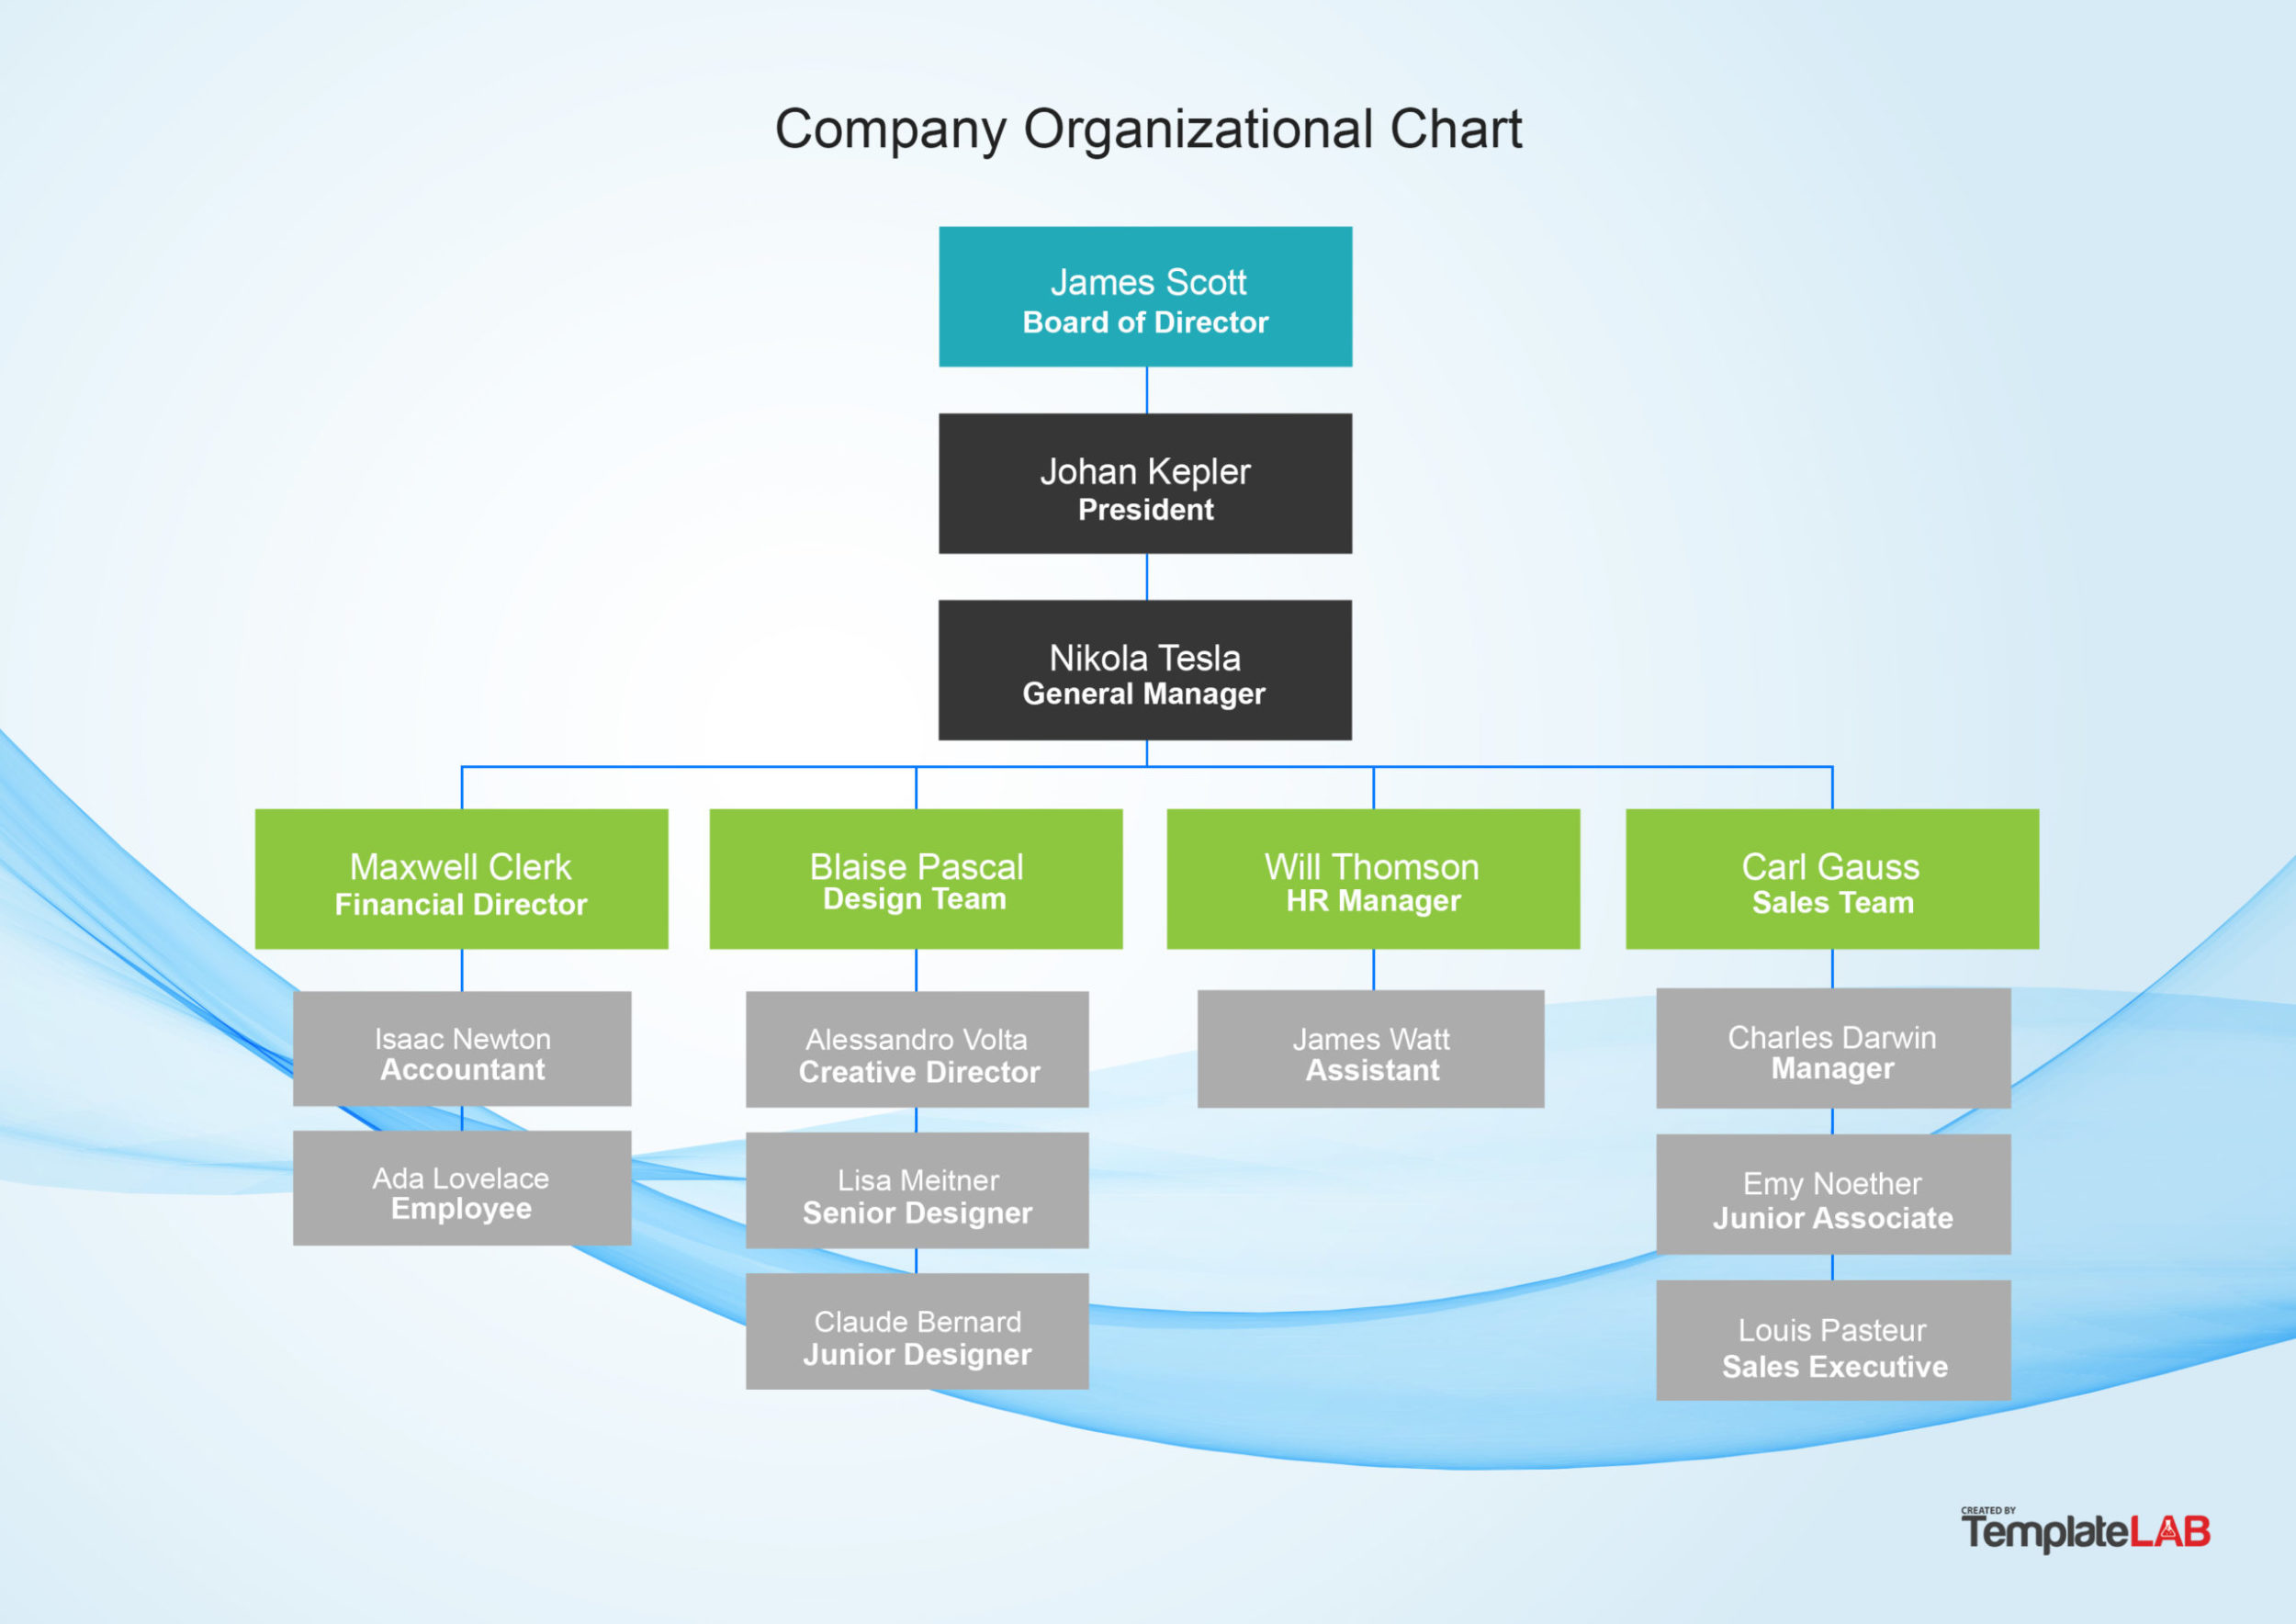 Organizational Chart Best Practices for Meaningful Org Charts - Creately Blog